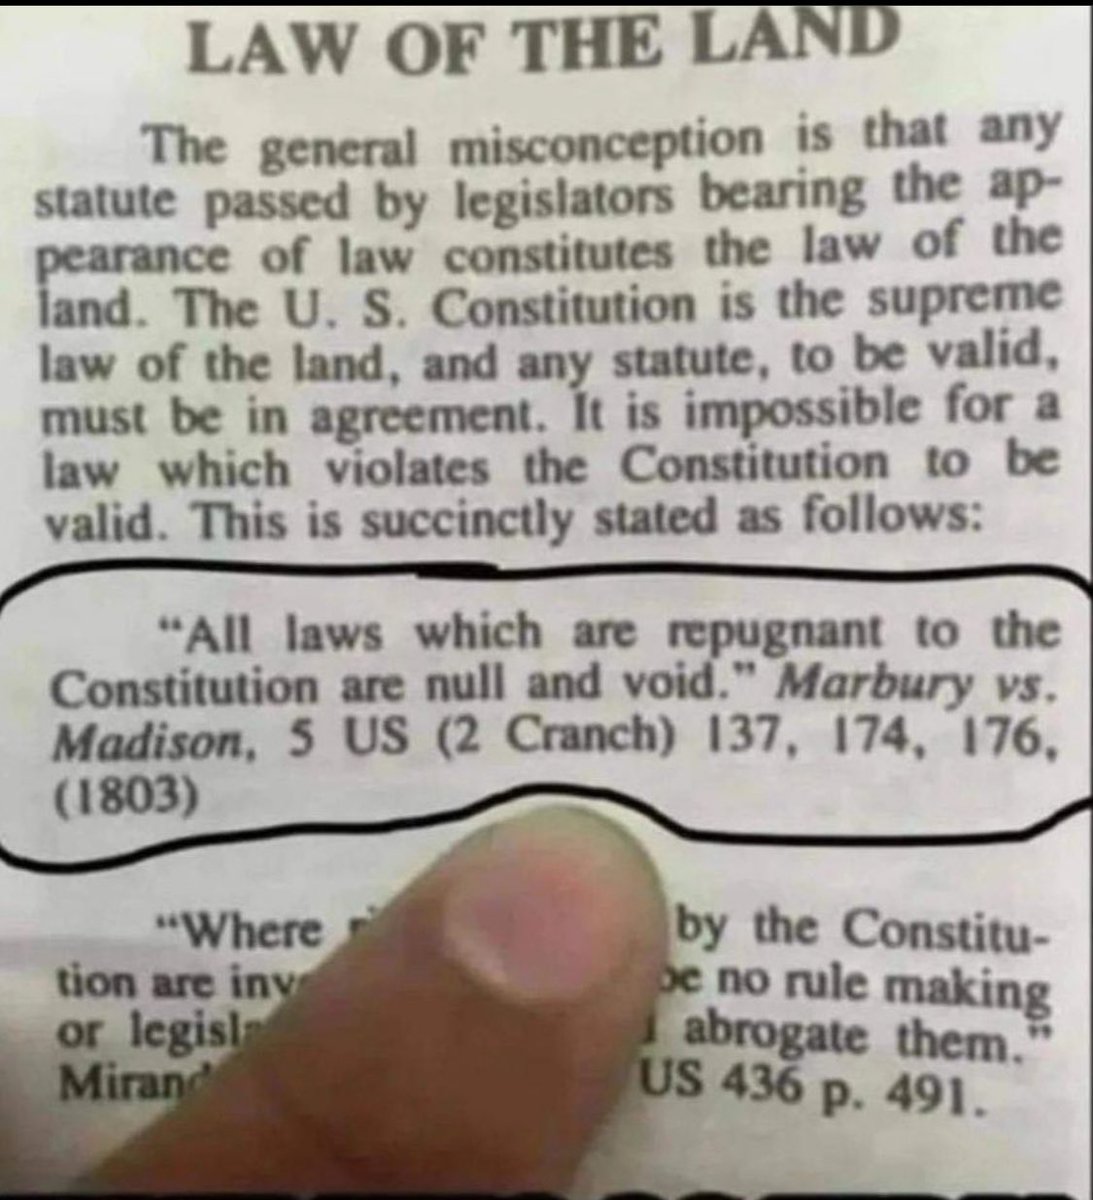 “All laws which are repugnant to the Constitution are null and void.” 

United States #Constitution #lawoftheland